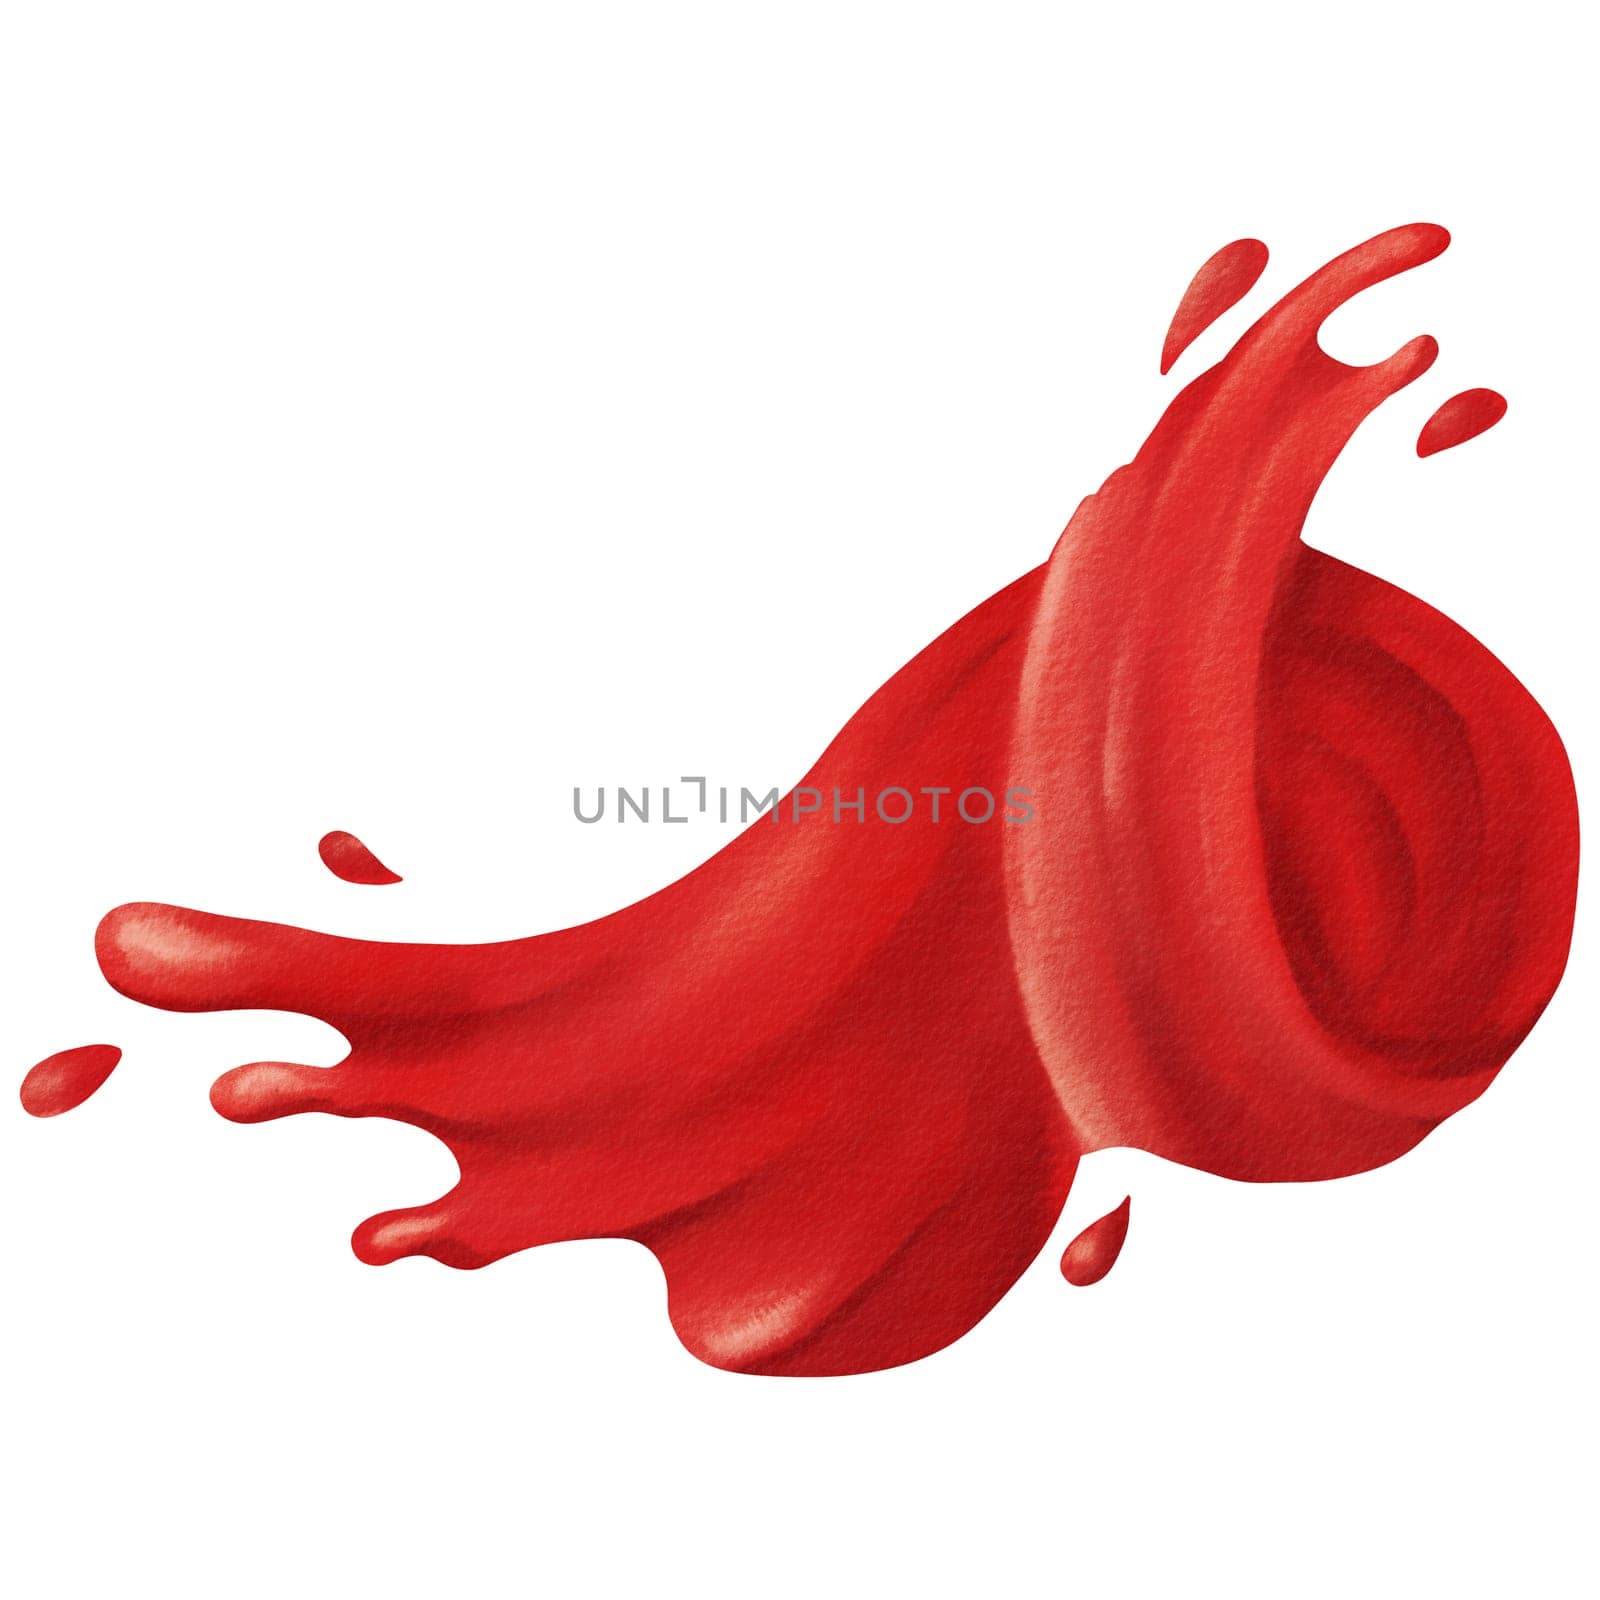 Berry juice splash, swirl of fruit and berry compote splashing. Splash of wine or red juice or blood. liquid of falling clear fruit drink, strawberry, grape or cherry juice. watercolor illustration by Art_Mari_Ka